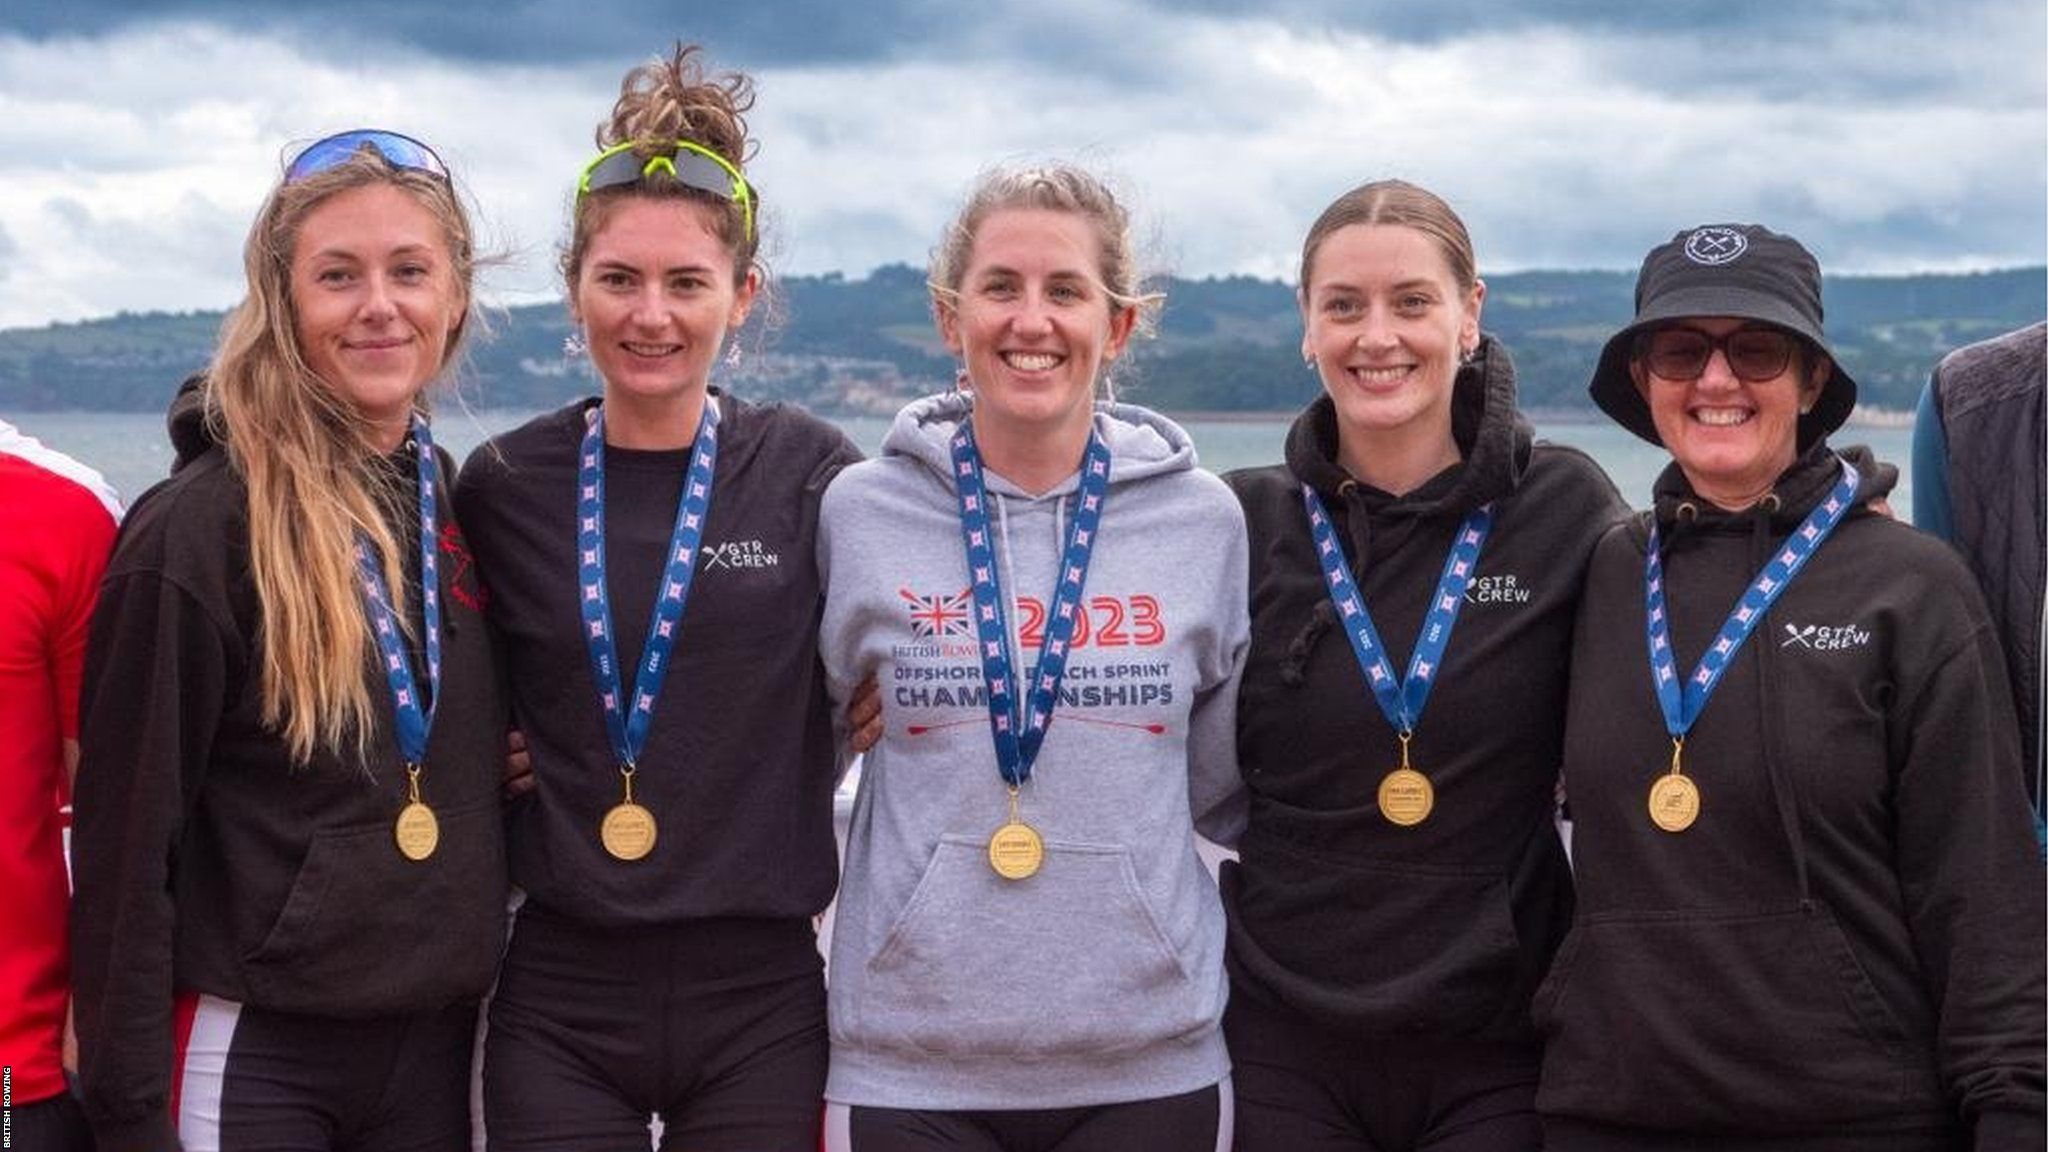 Jersey women coxless four with their gold medals